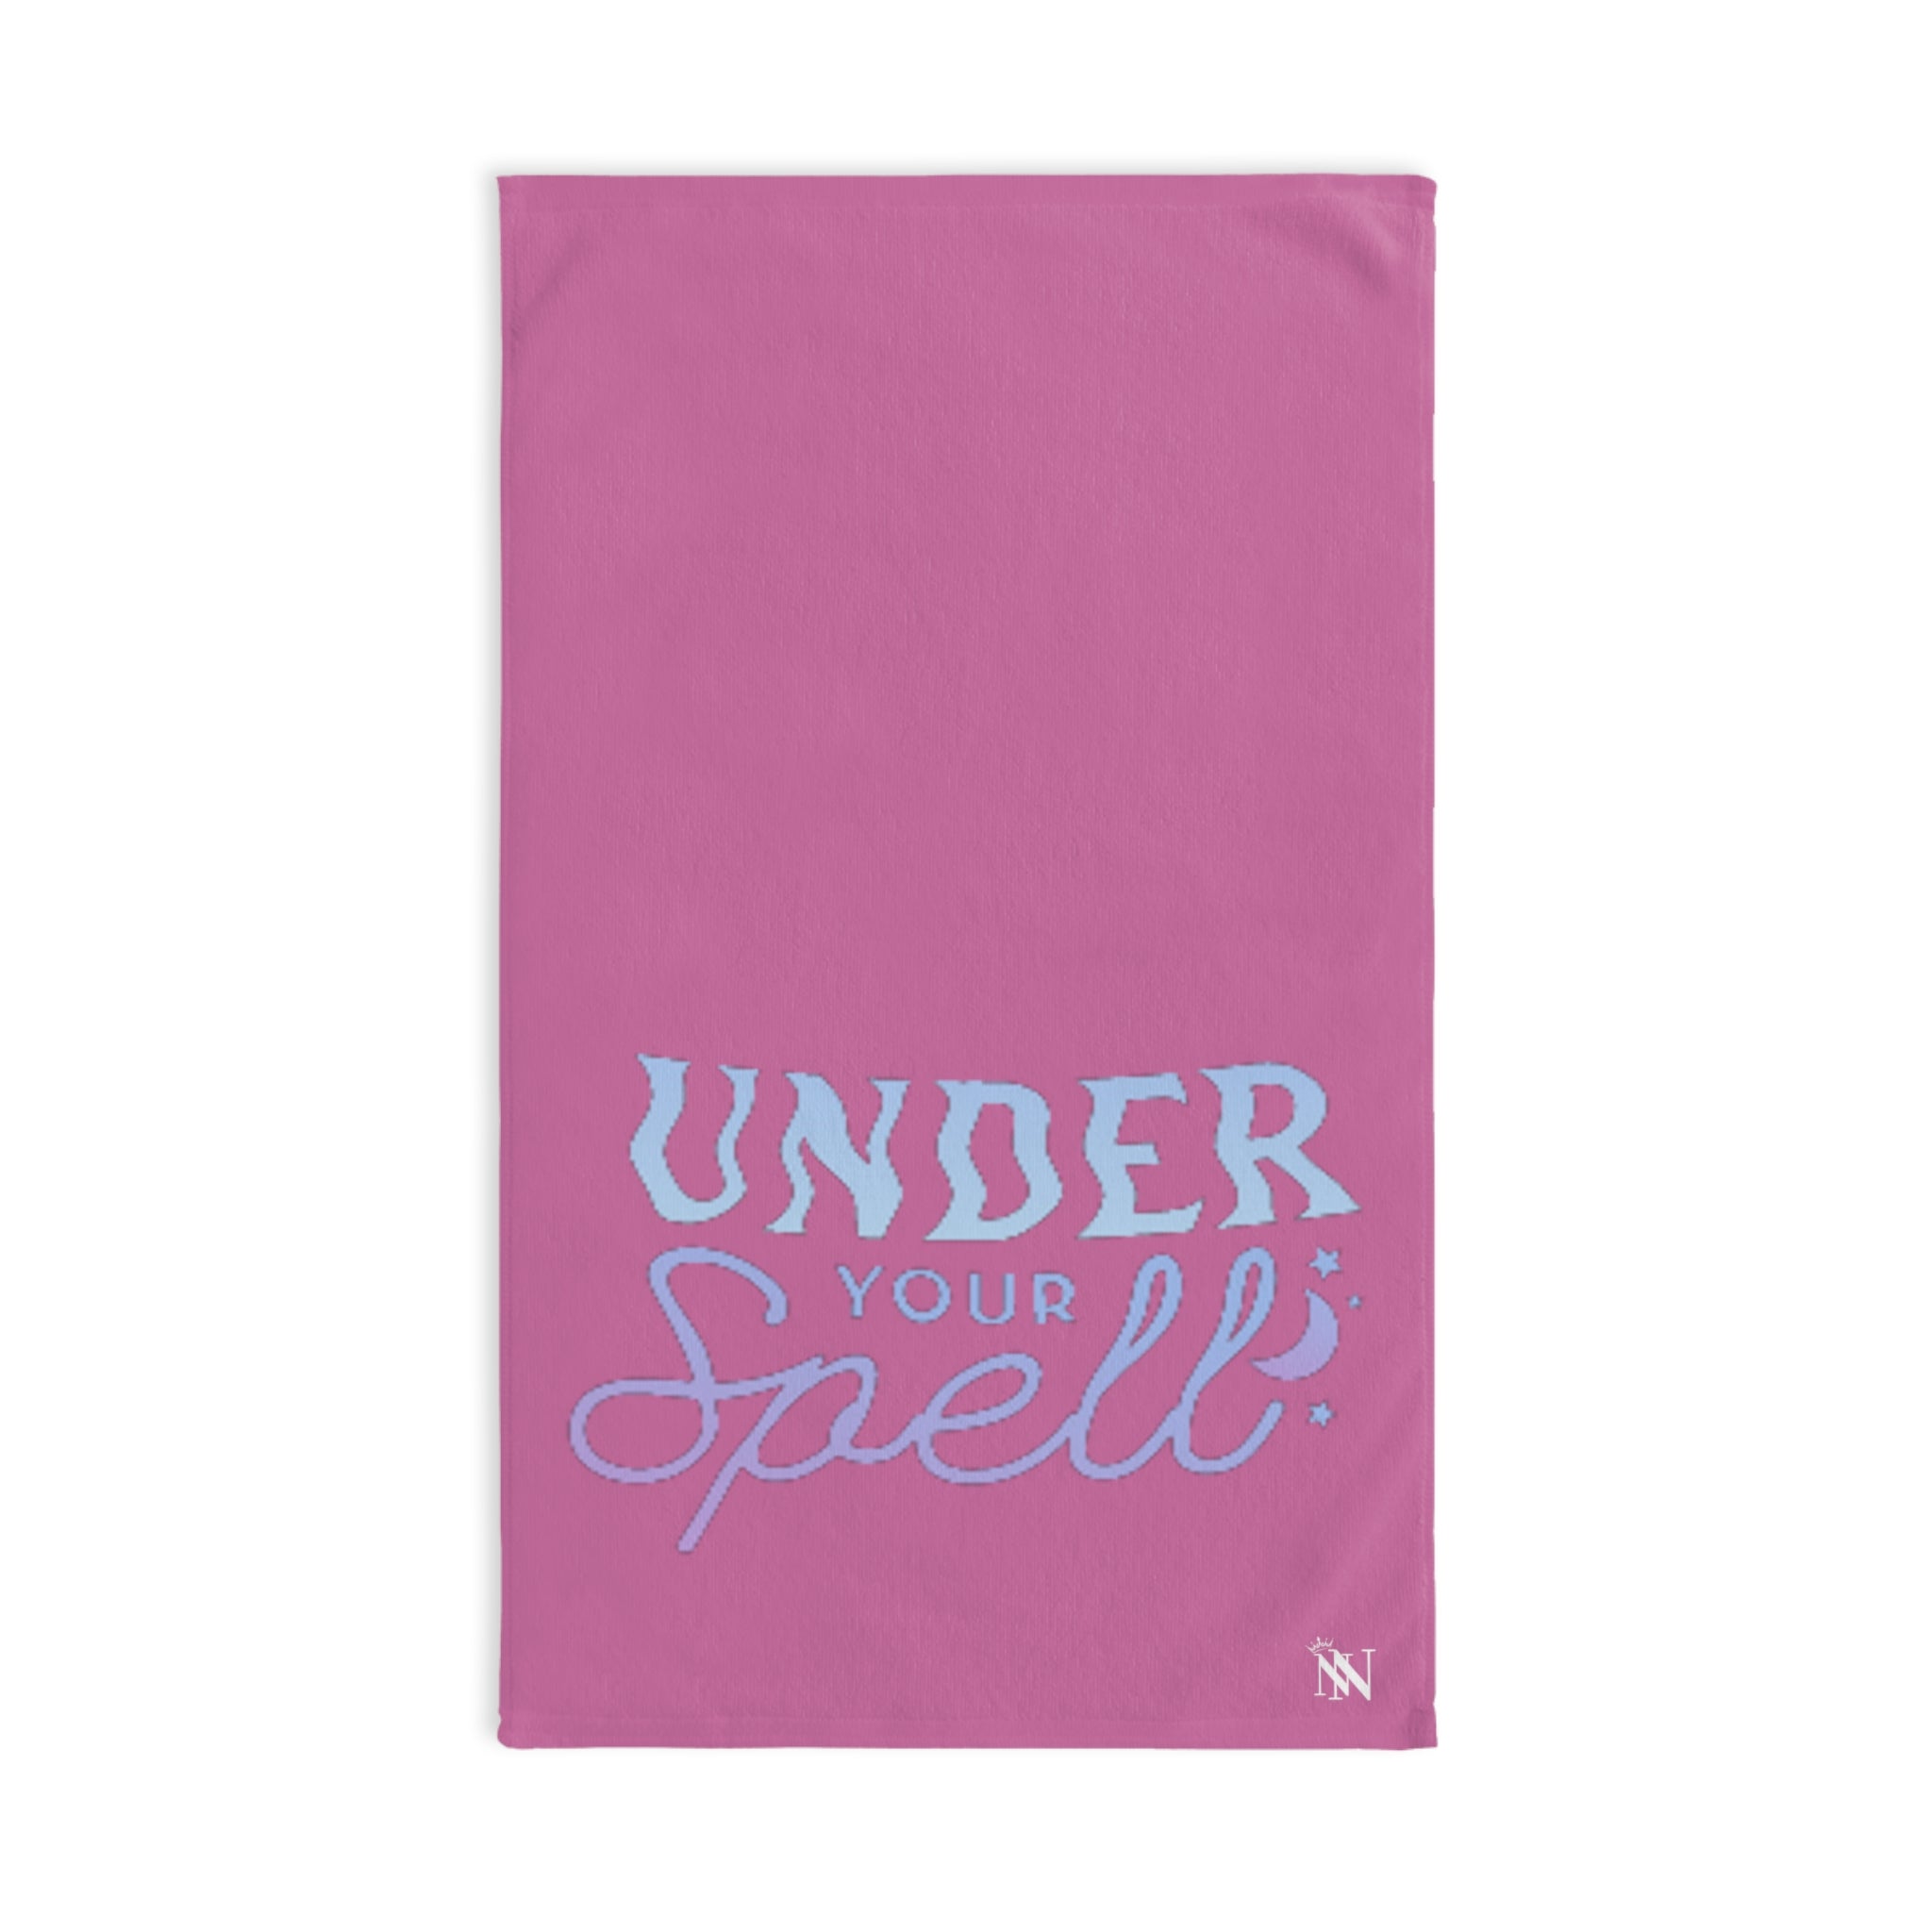 Spell Under CastPink | Novelty Gifts for Boyfriend, Funny Towel Romantic Gift for Wedding Couple Fiance First Year Anniversary Valentines, Party Gag Gifts, Joke Humor Cloth for Husband Men BF NECTAR NAPKINS